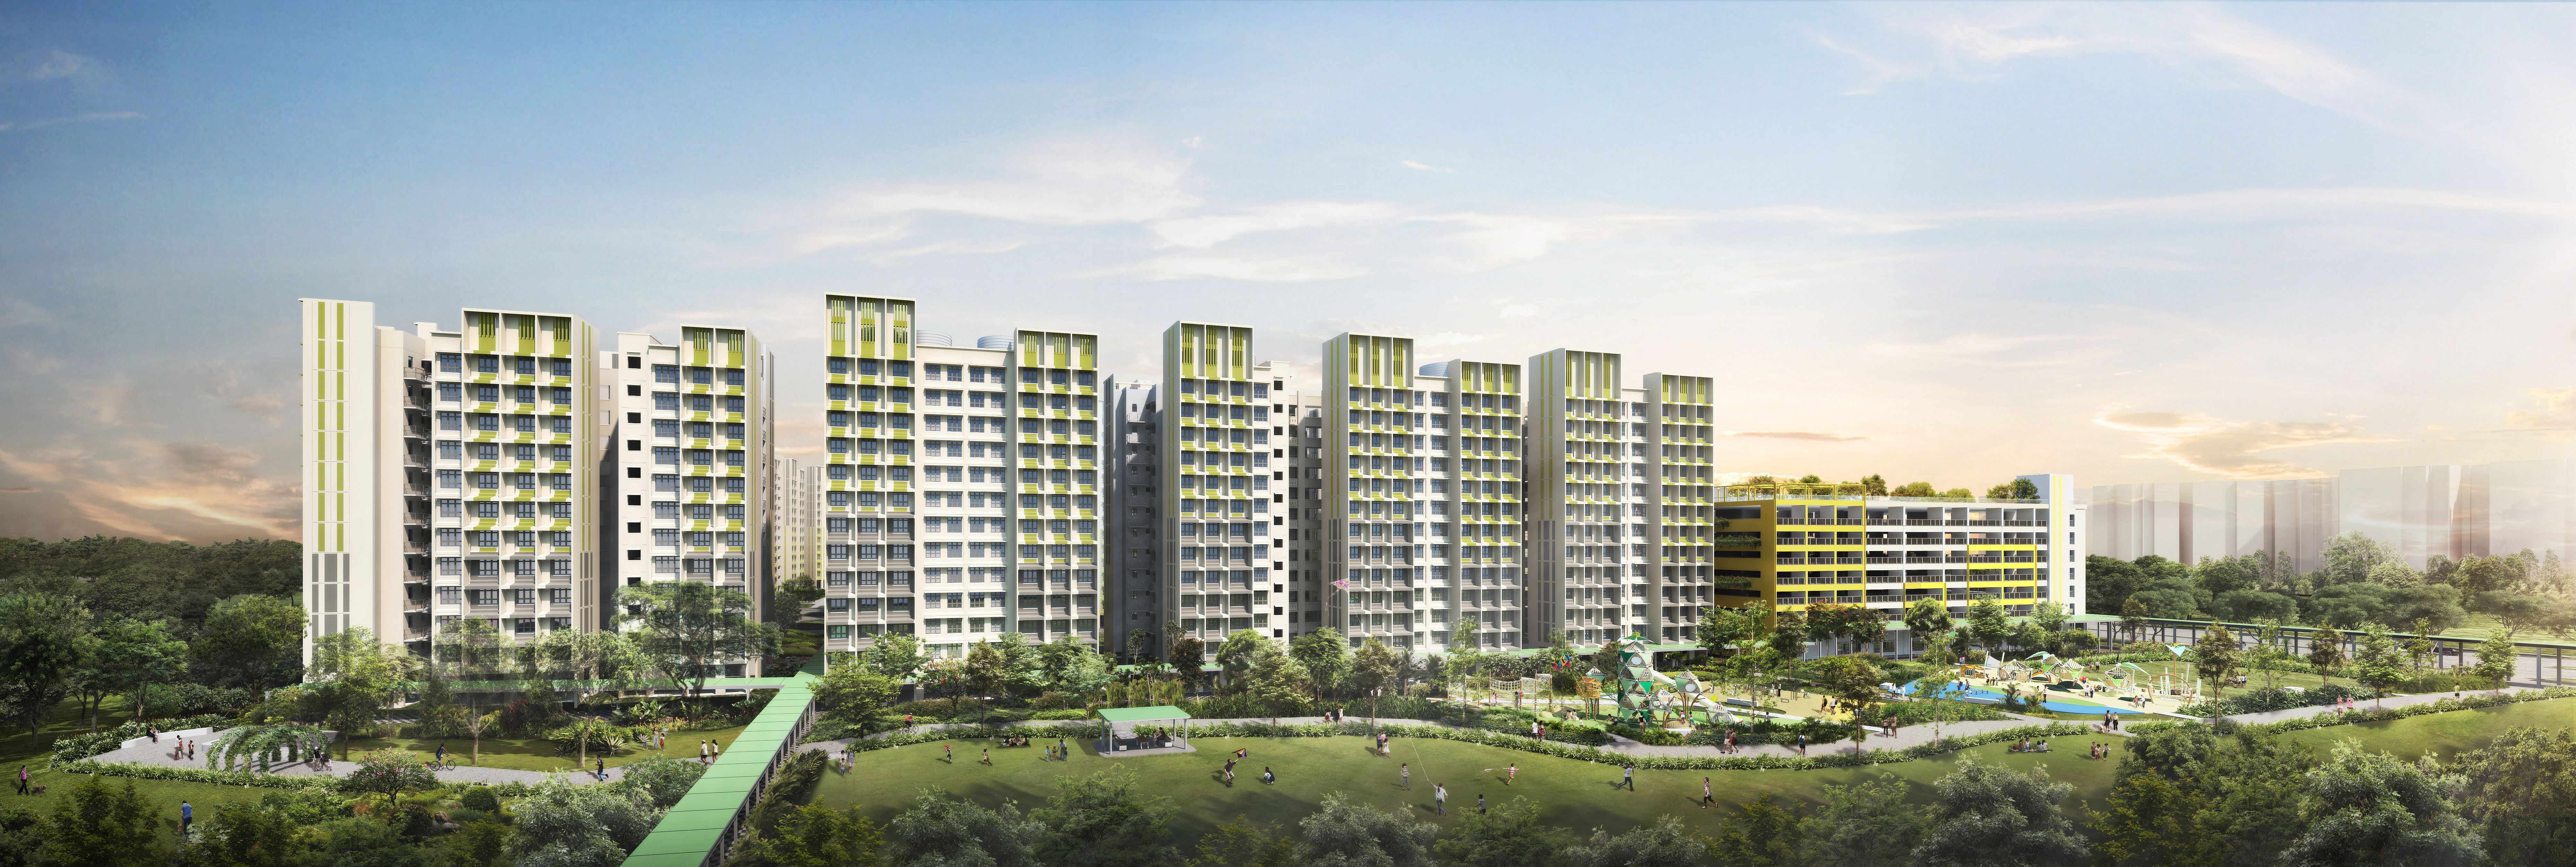 HDB launches nearly 7,000 new flats, including 1,500 sale of balance flats across the island